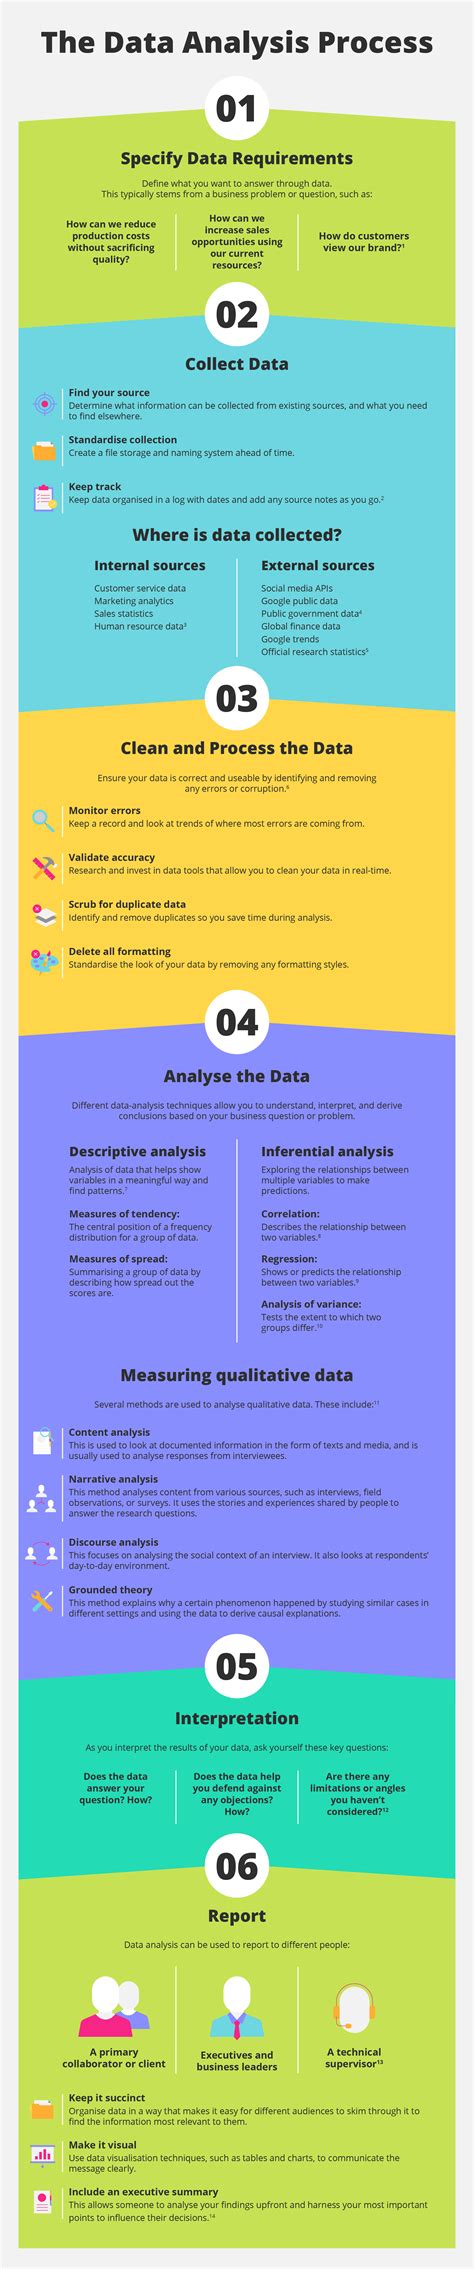 The Data Analysis Process in 6 Steps | GetSmarter Blog